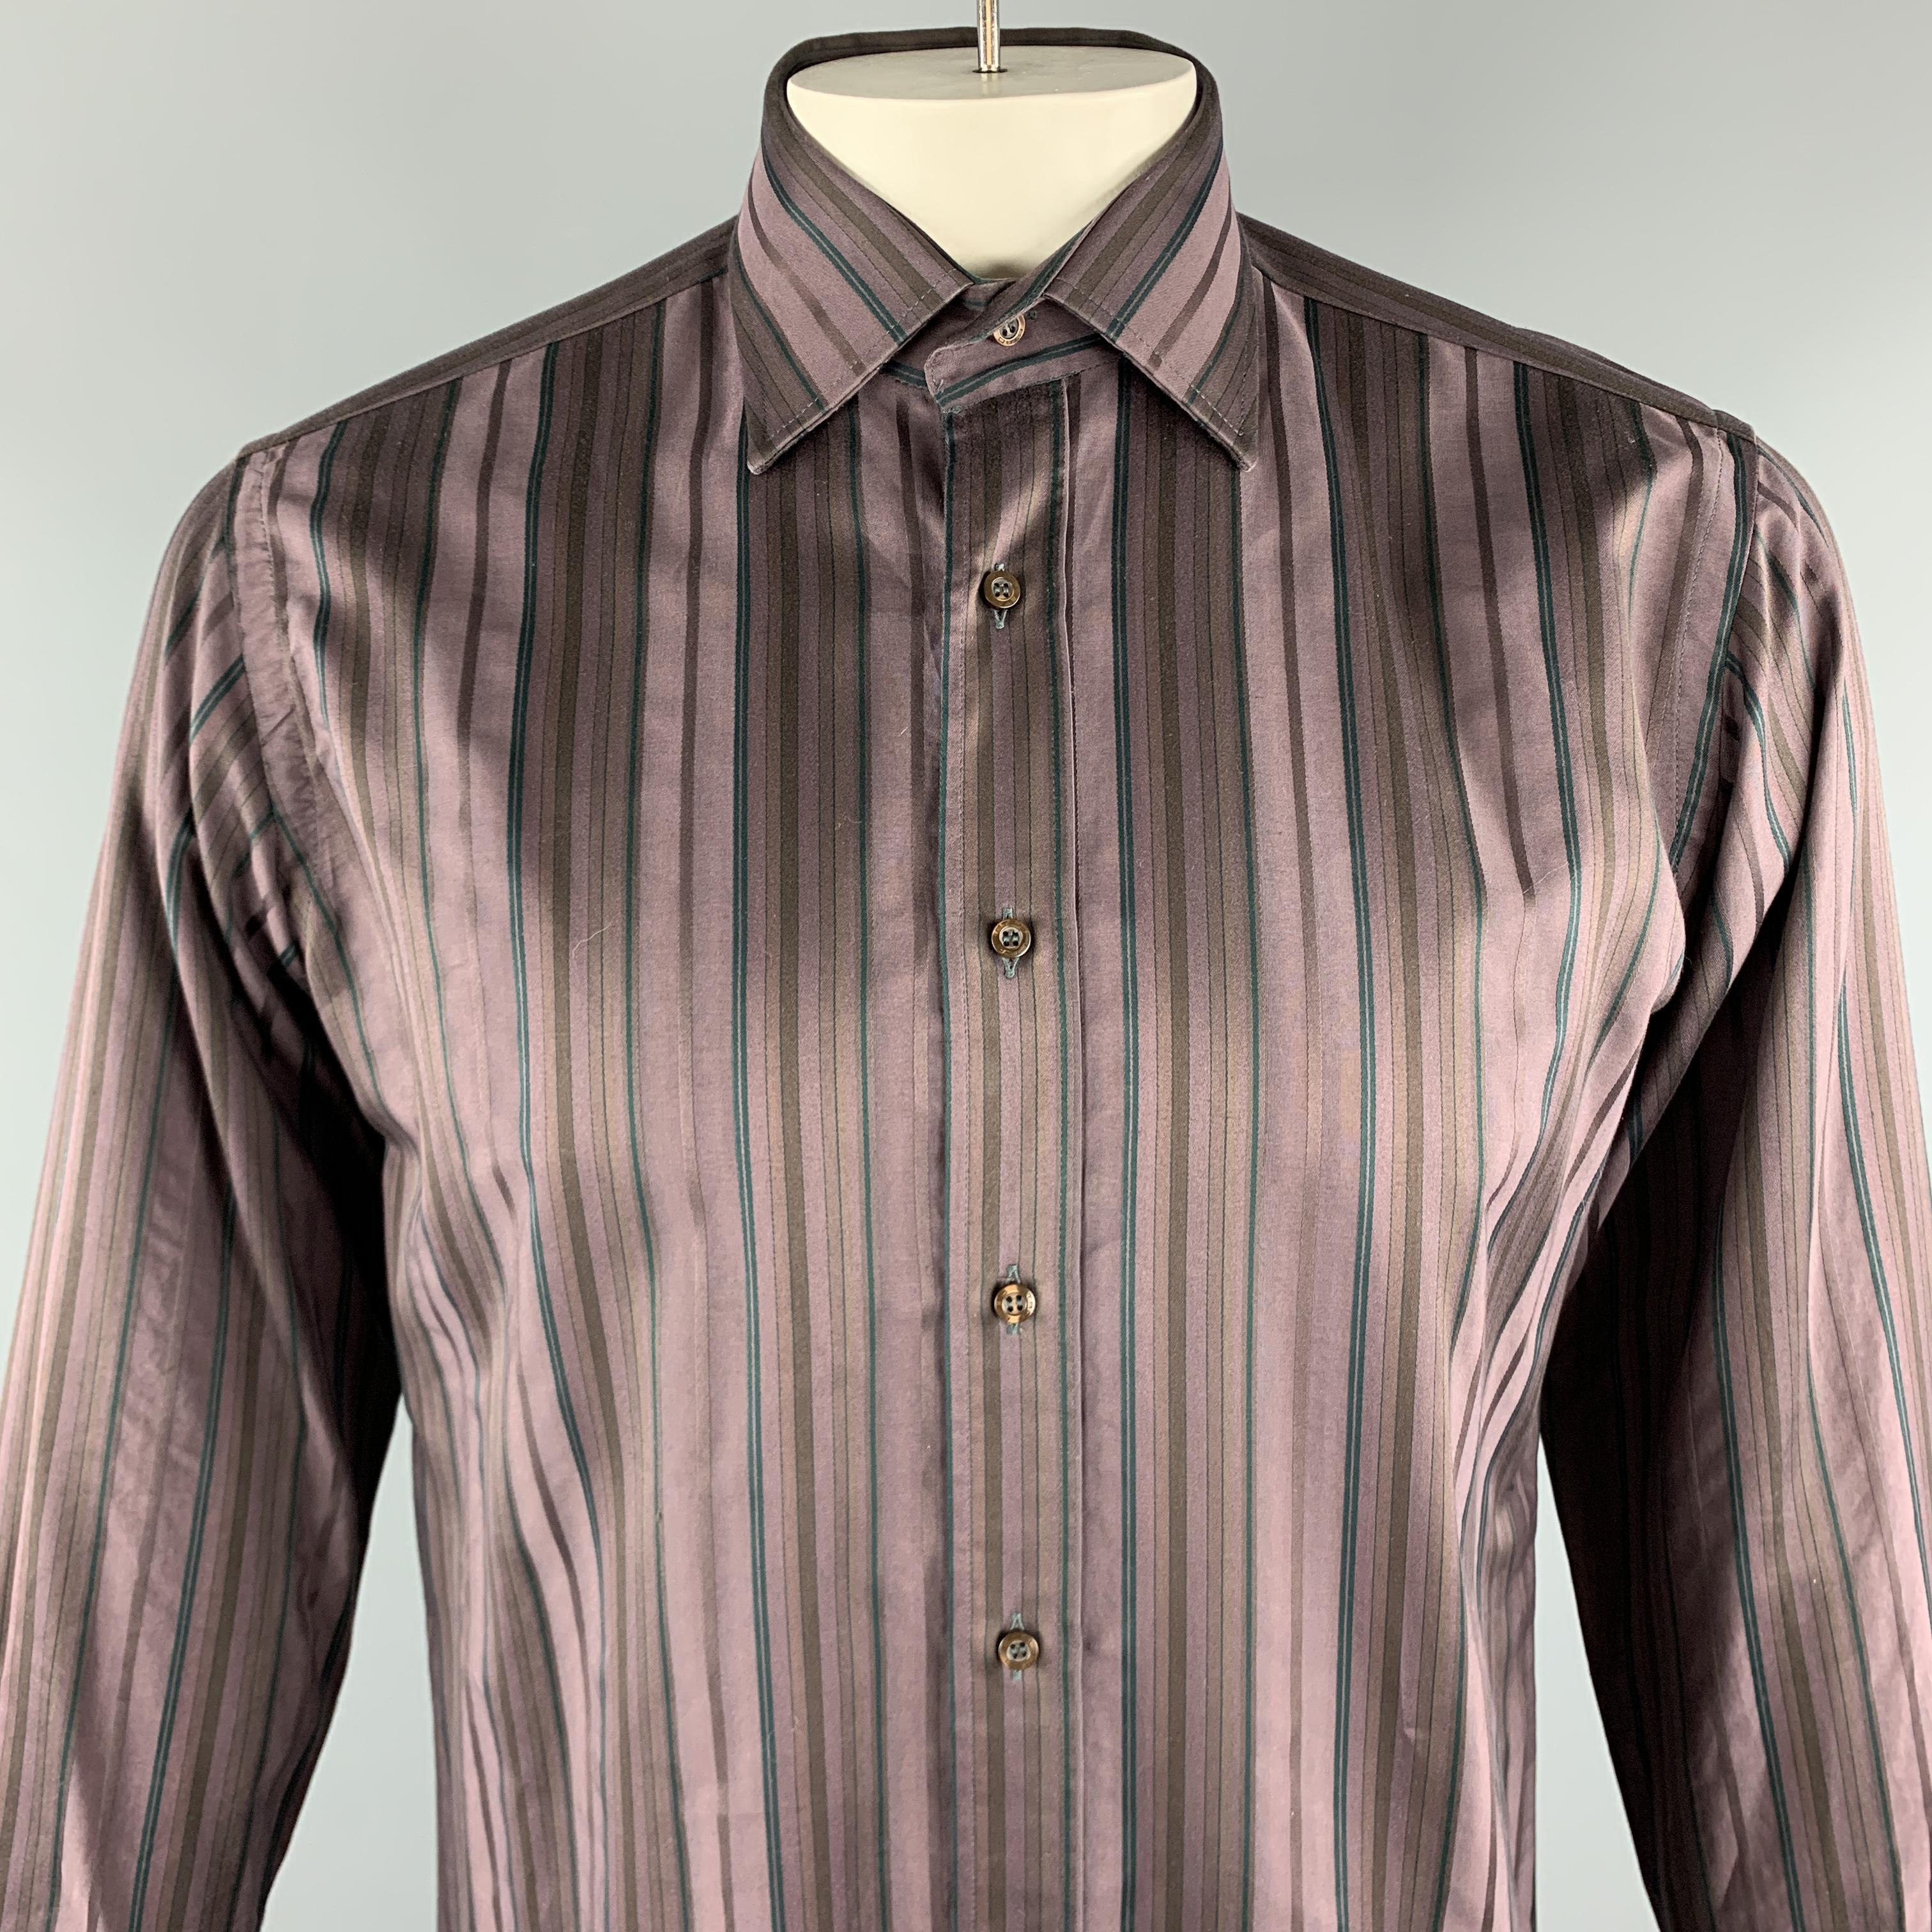 ETRO Long Sleeve Shirt comes in brown tones in a striped cotton material, with a spread collar and buttoned cuffs, button up. Made in Italy.

Very Good Pre-Owned Condition.
Marked: 40

Measurements:

Shoulder: 17.5 in. 
Chest: 46 in. 
Sleeve: 24.5